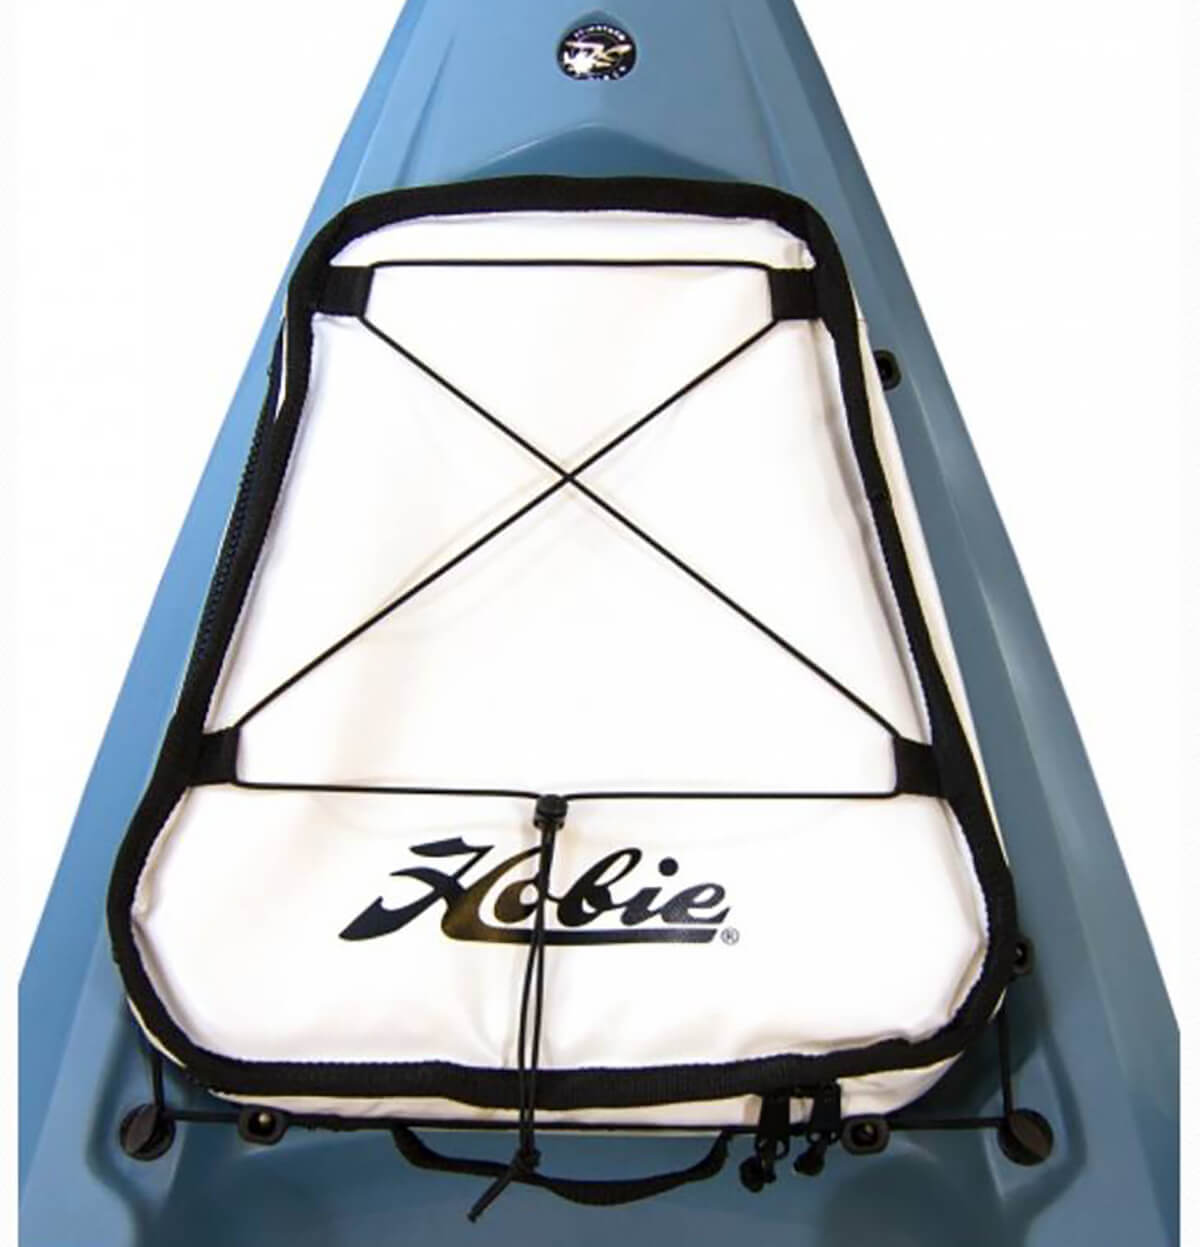 Accessories and mounts for Hobie Tandem Island and any other kayak